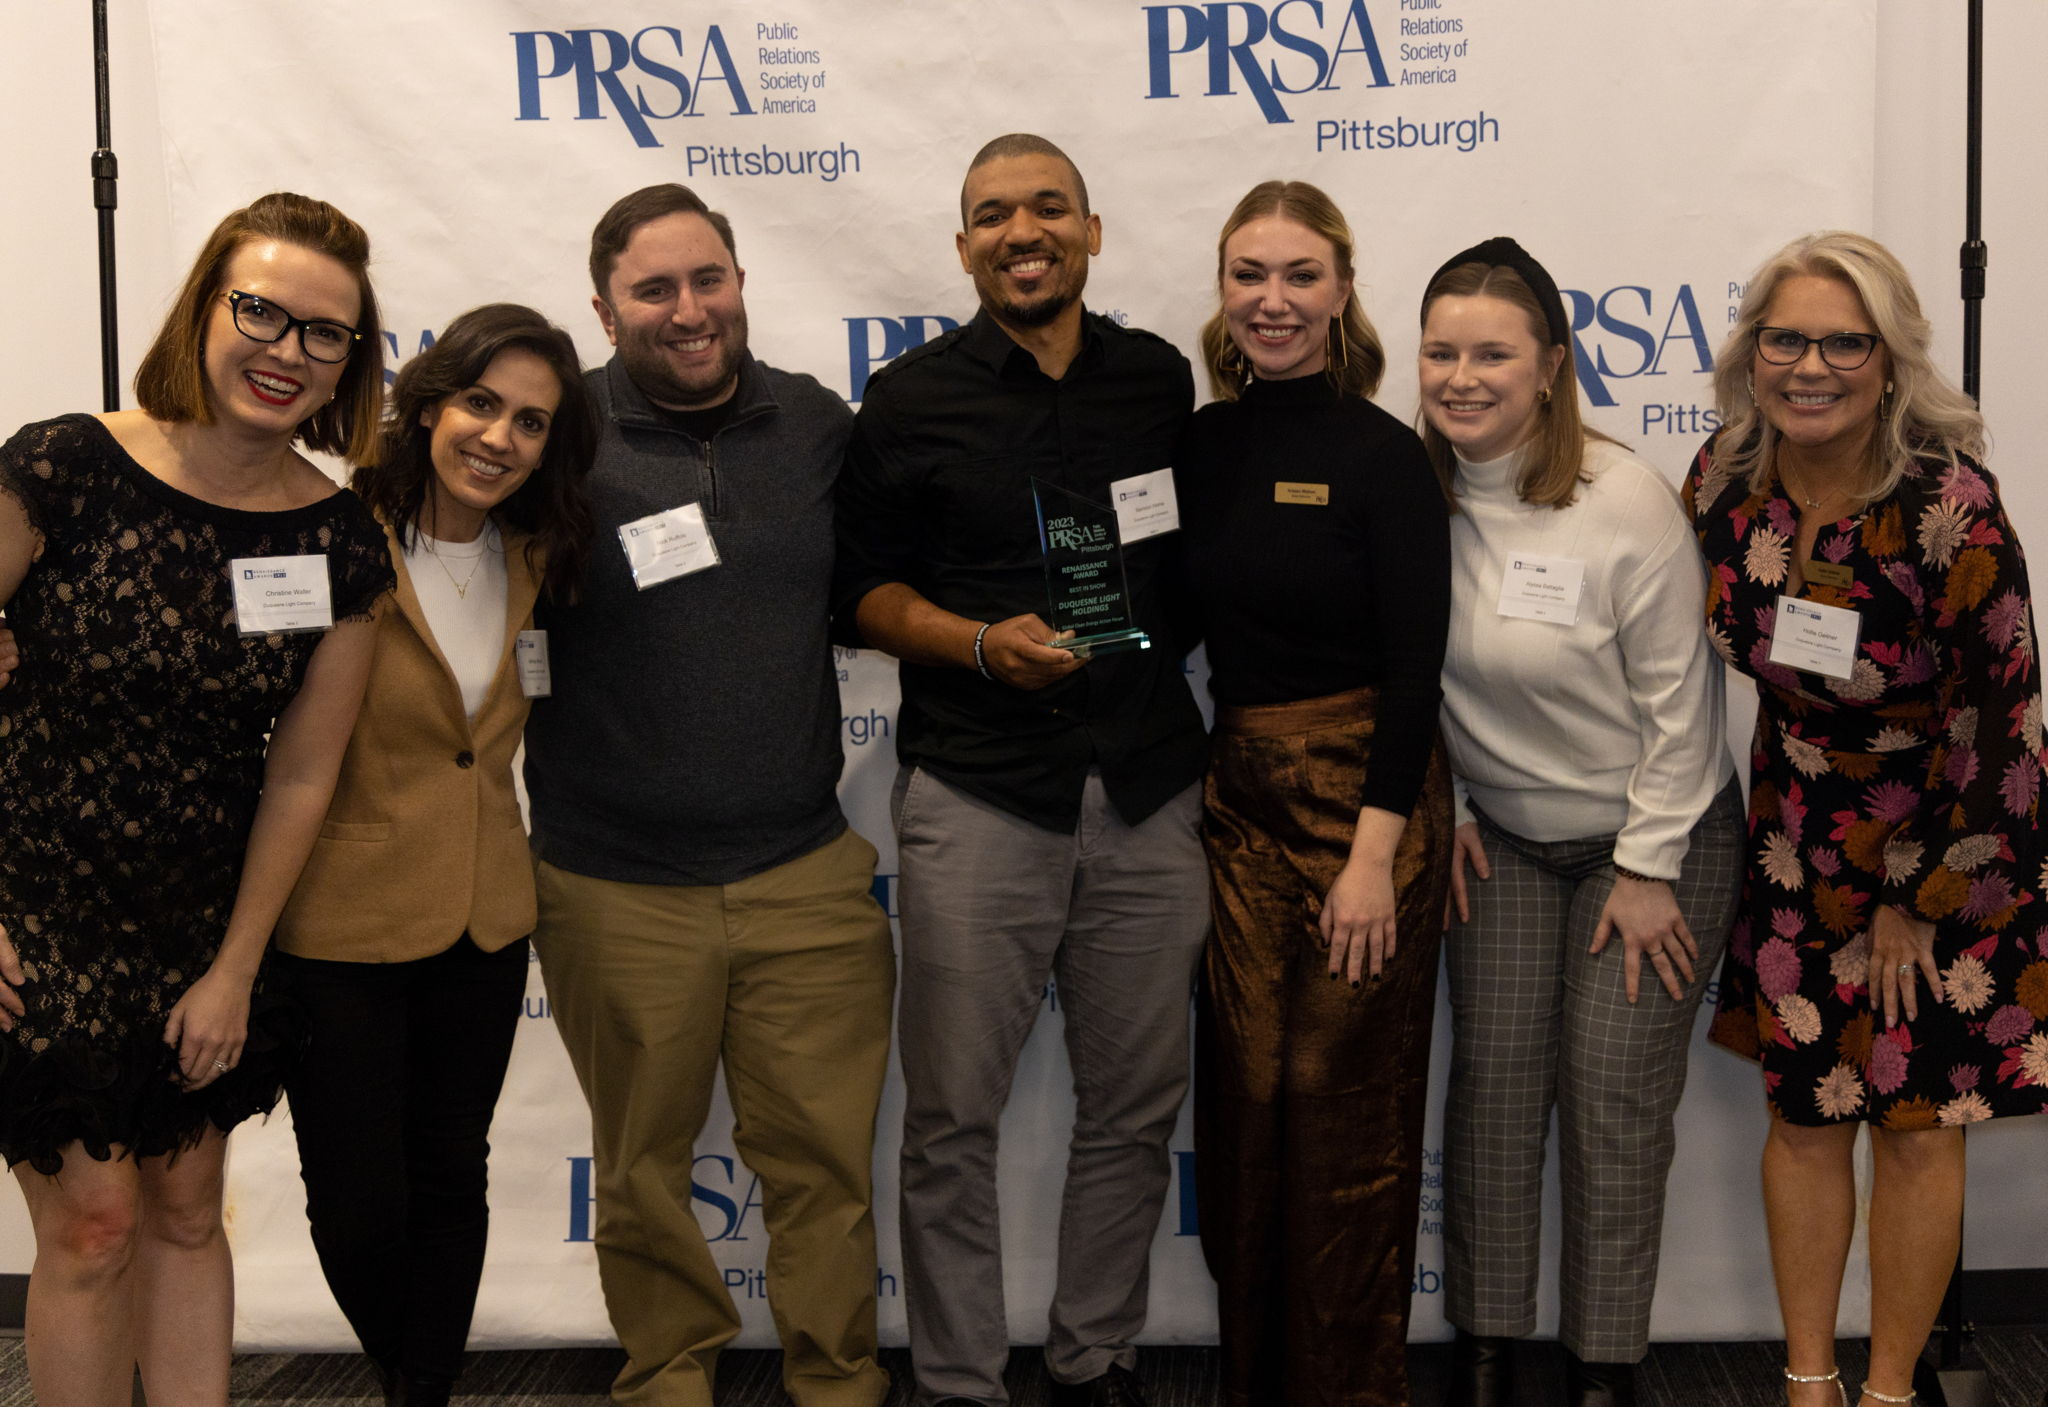 Members of Duquesne Light Company's corporate communications team accepted the "Best in Show" award during the 2023 PRSA Pittsburgh Renaissance Awards held a Carnegie Science Center on Jan. 26. Pictured from left: Christine Waller, Ashley Macik, Nick Ruffolo, Samson Horne, Kristen Wishon, Alyssa Battaglia and Hollie Geitner.